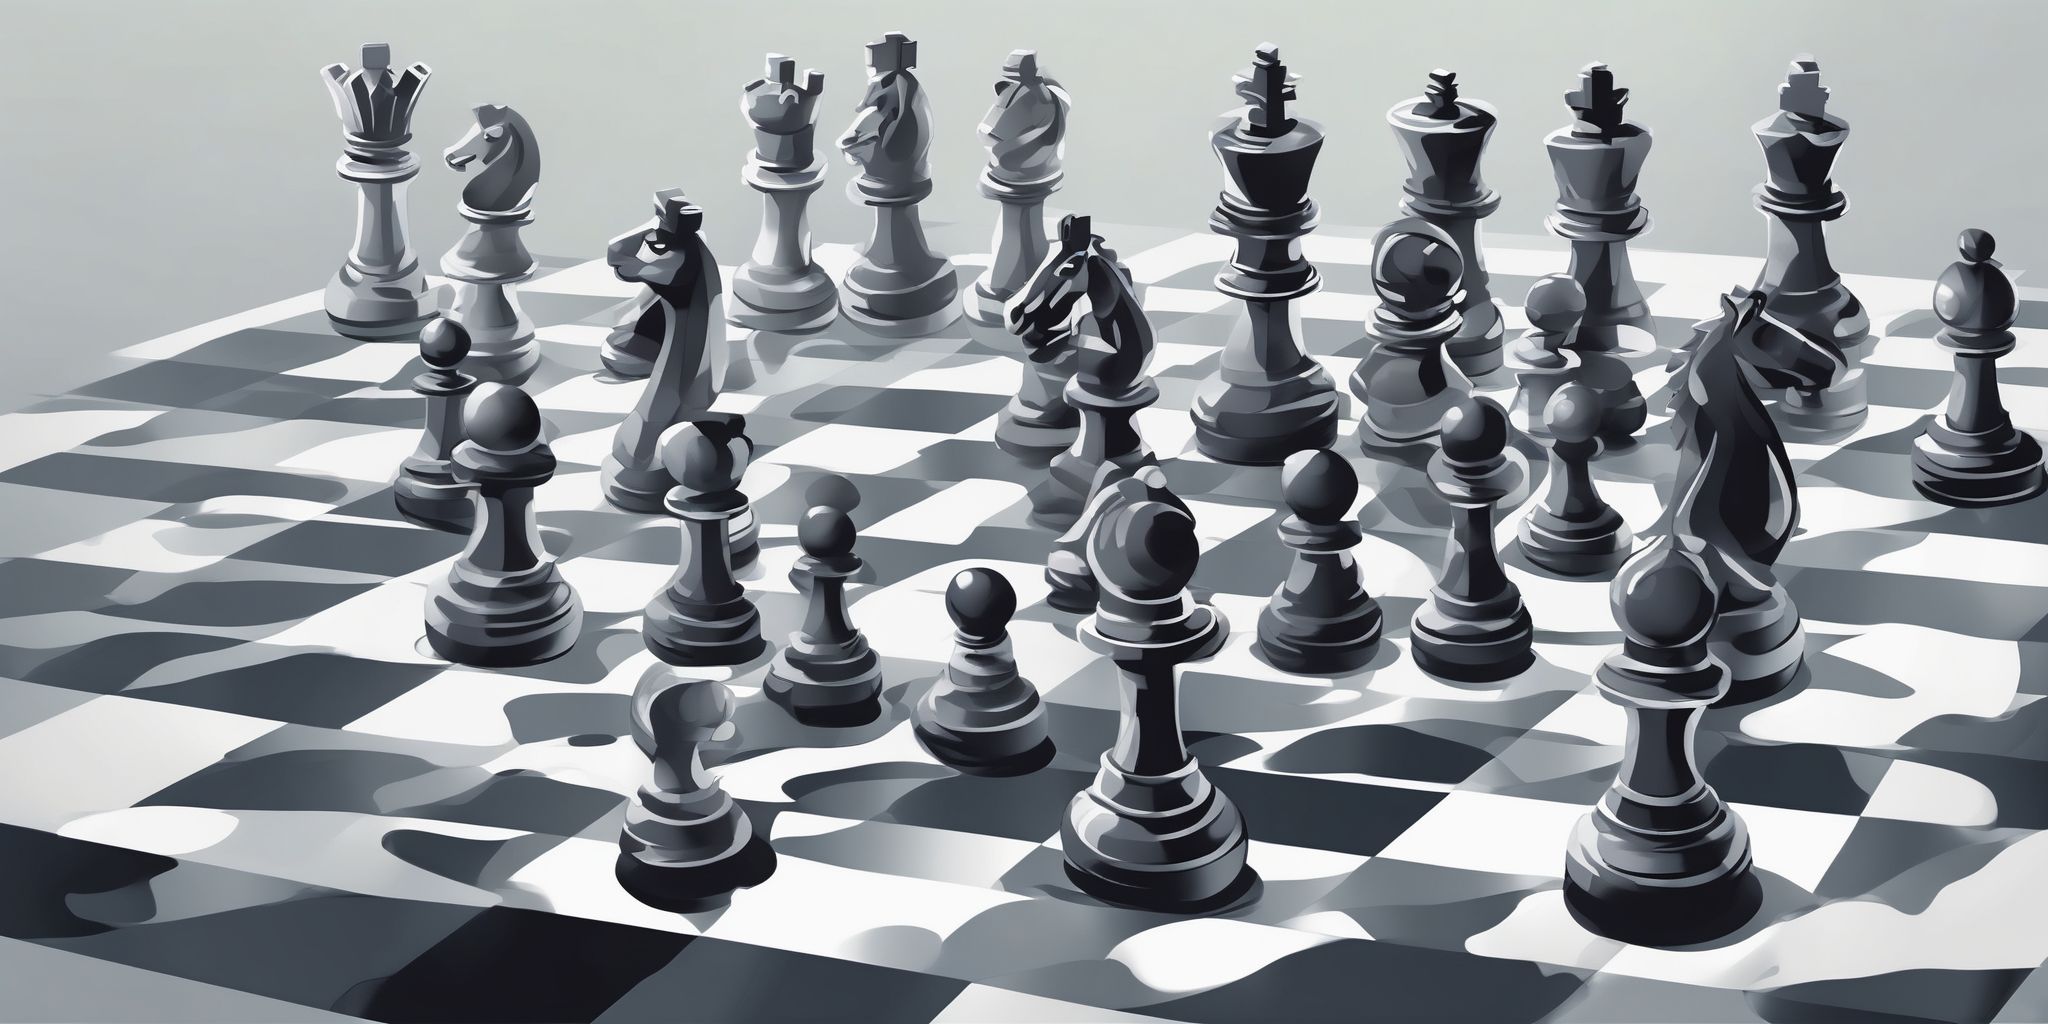 Digital chess in illustration style with gradients and white background